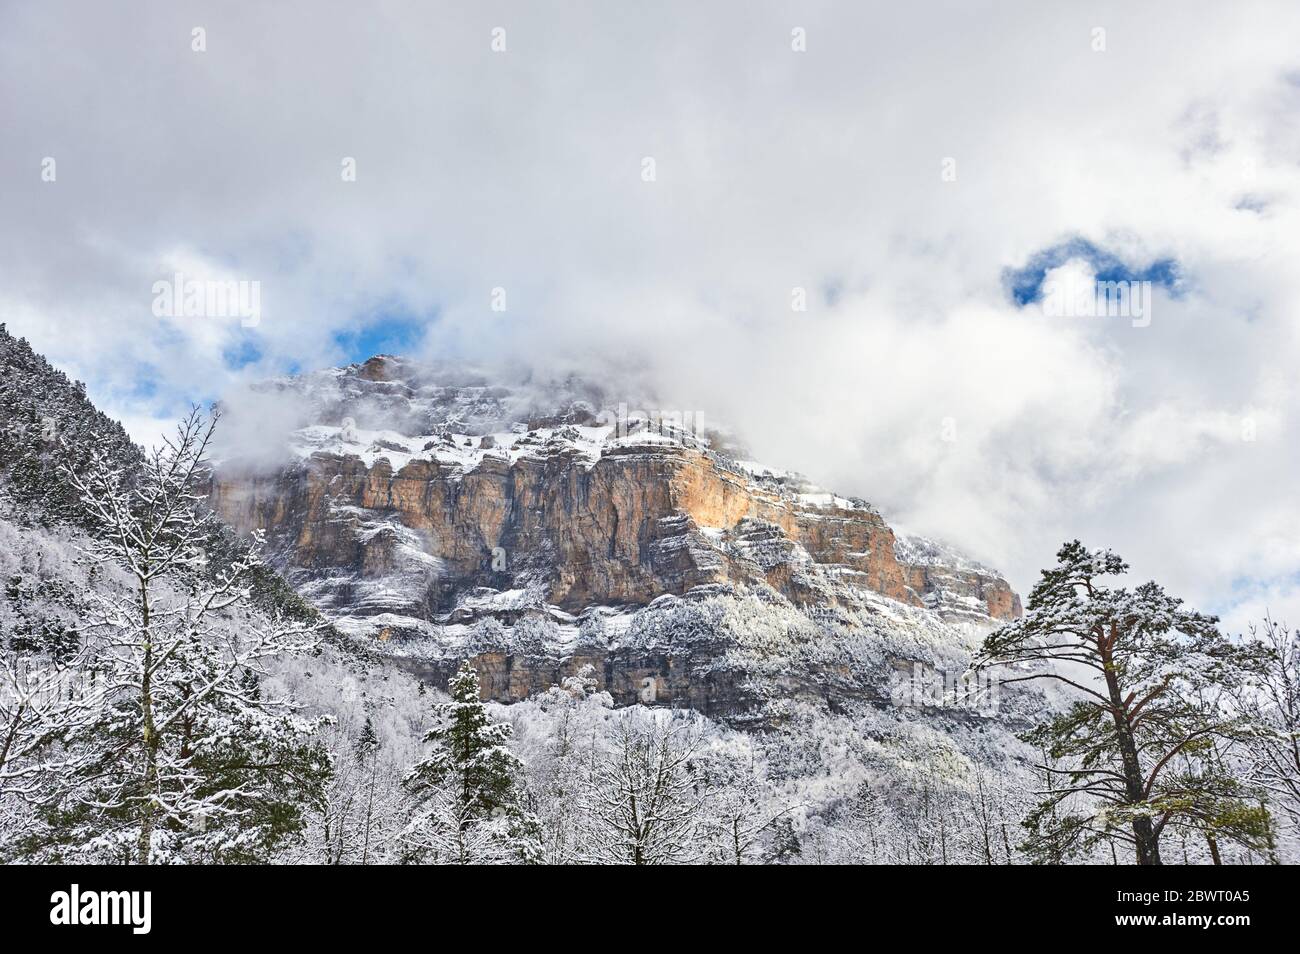 Pyrenees: Snowy view of Morron Tobacor mountain in the National park of Ordesa and Monte Perdido (Huesca province, Aragon region, Spain) Stock Photo